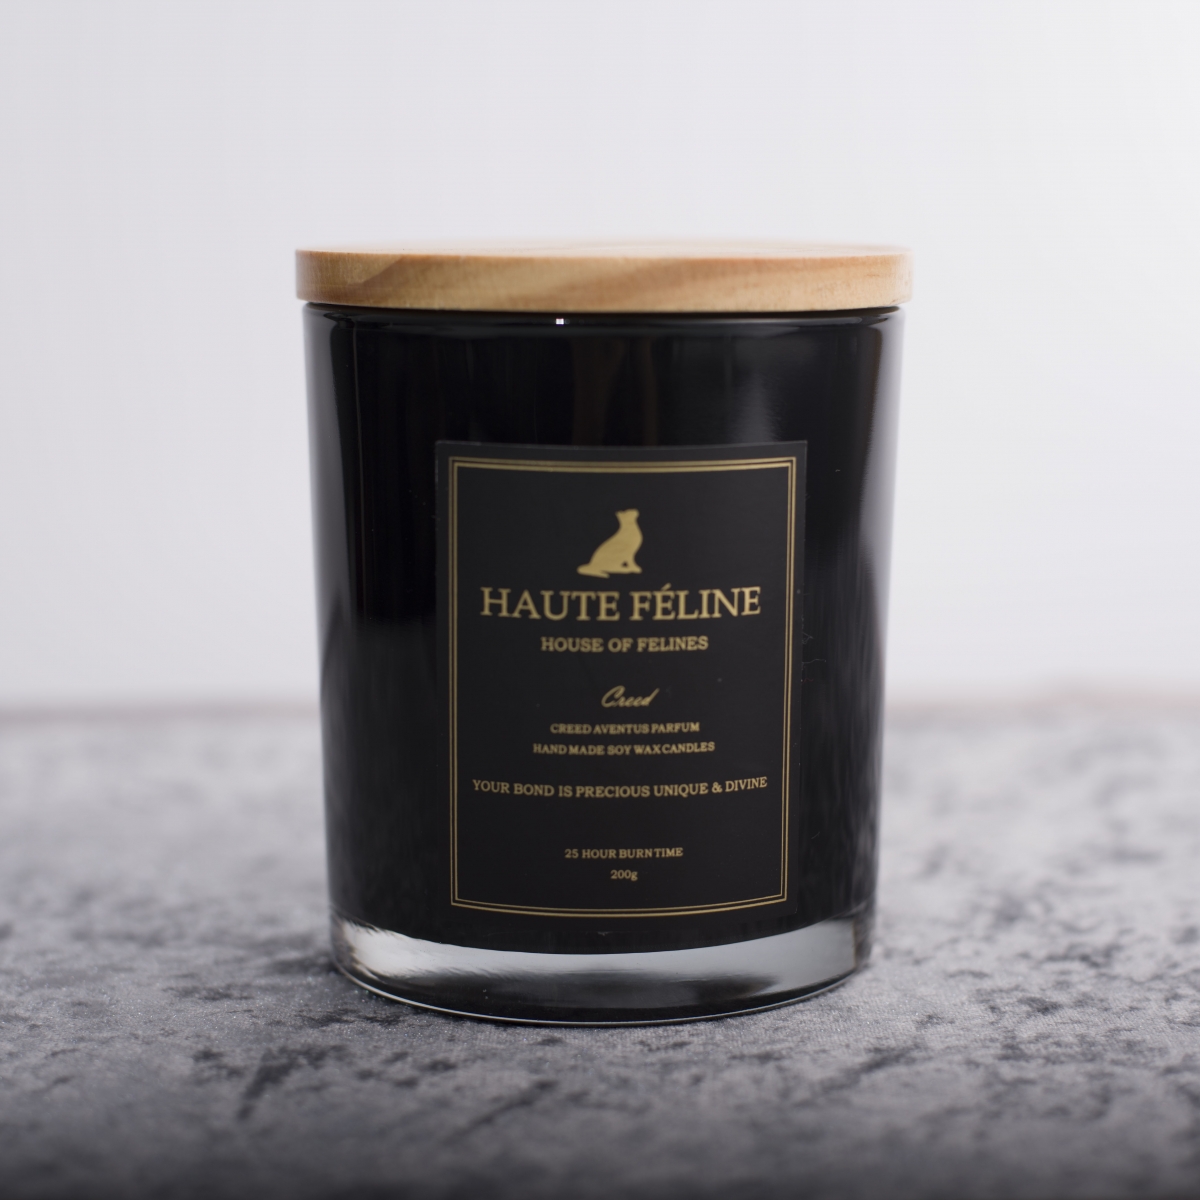 Scented Candles -Best Soy Candles,Creed Aventus ,Perfume Candles ,Wooden Wick ,Shiny Black Candle Jar ,Gold Foil Label, China Factory ,Price-HOWCANDLE-Candles,Scented Candles,Aromatherapy Candles,Soy Candles,Vegan Candles,Jar Candles,Pillar Candles,Candle Gift Sets,Essential Oils,Reed Diffuser,Candle Holder,